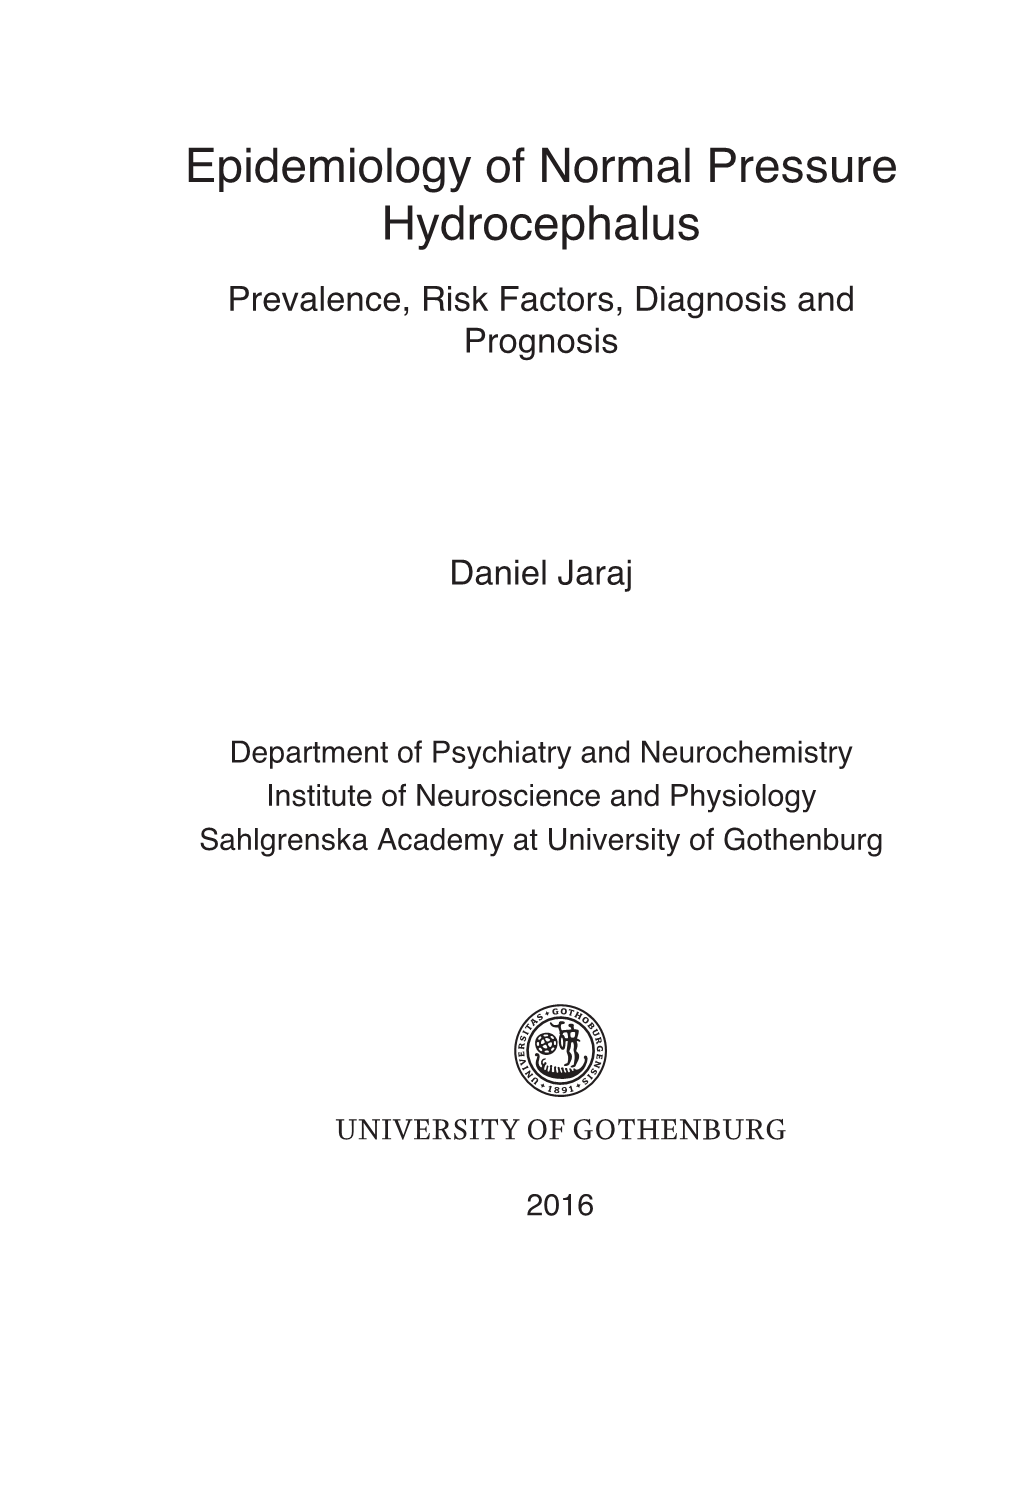 Epidemiology of Normal Pressure Hydrocephalus Prevalence, Risk Factors, Diagnosis and Prognosis